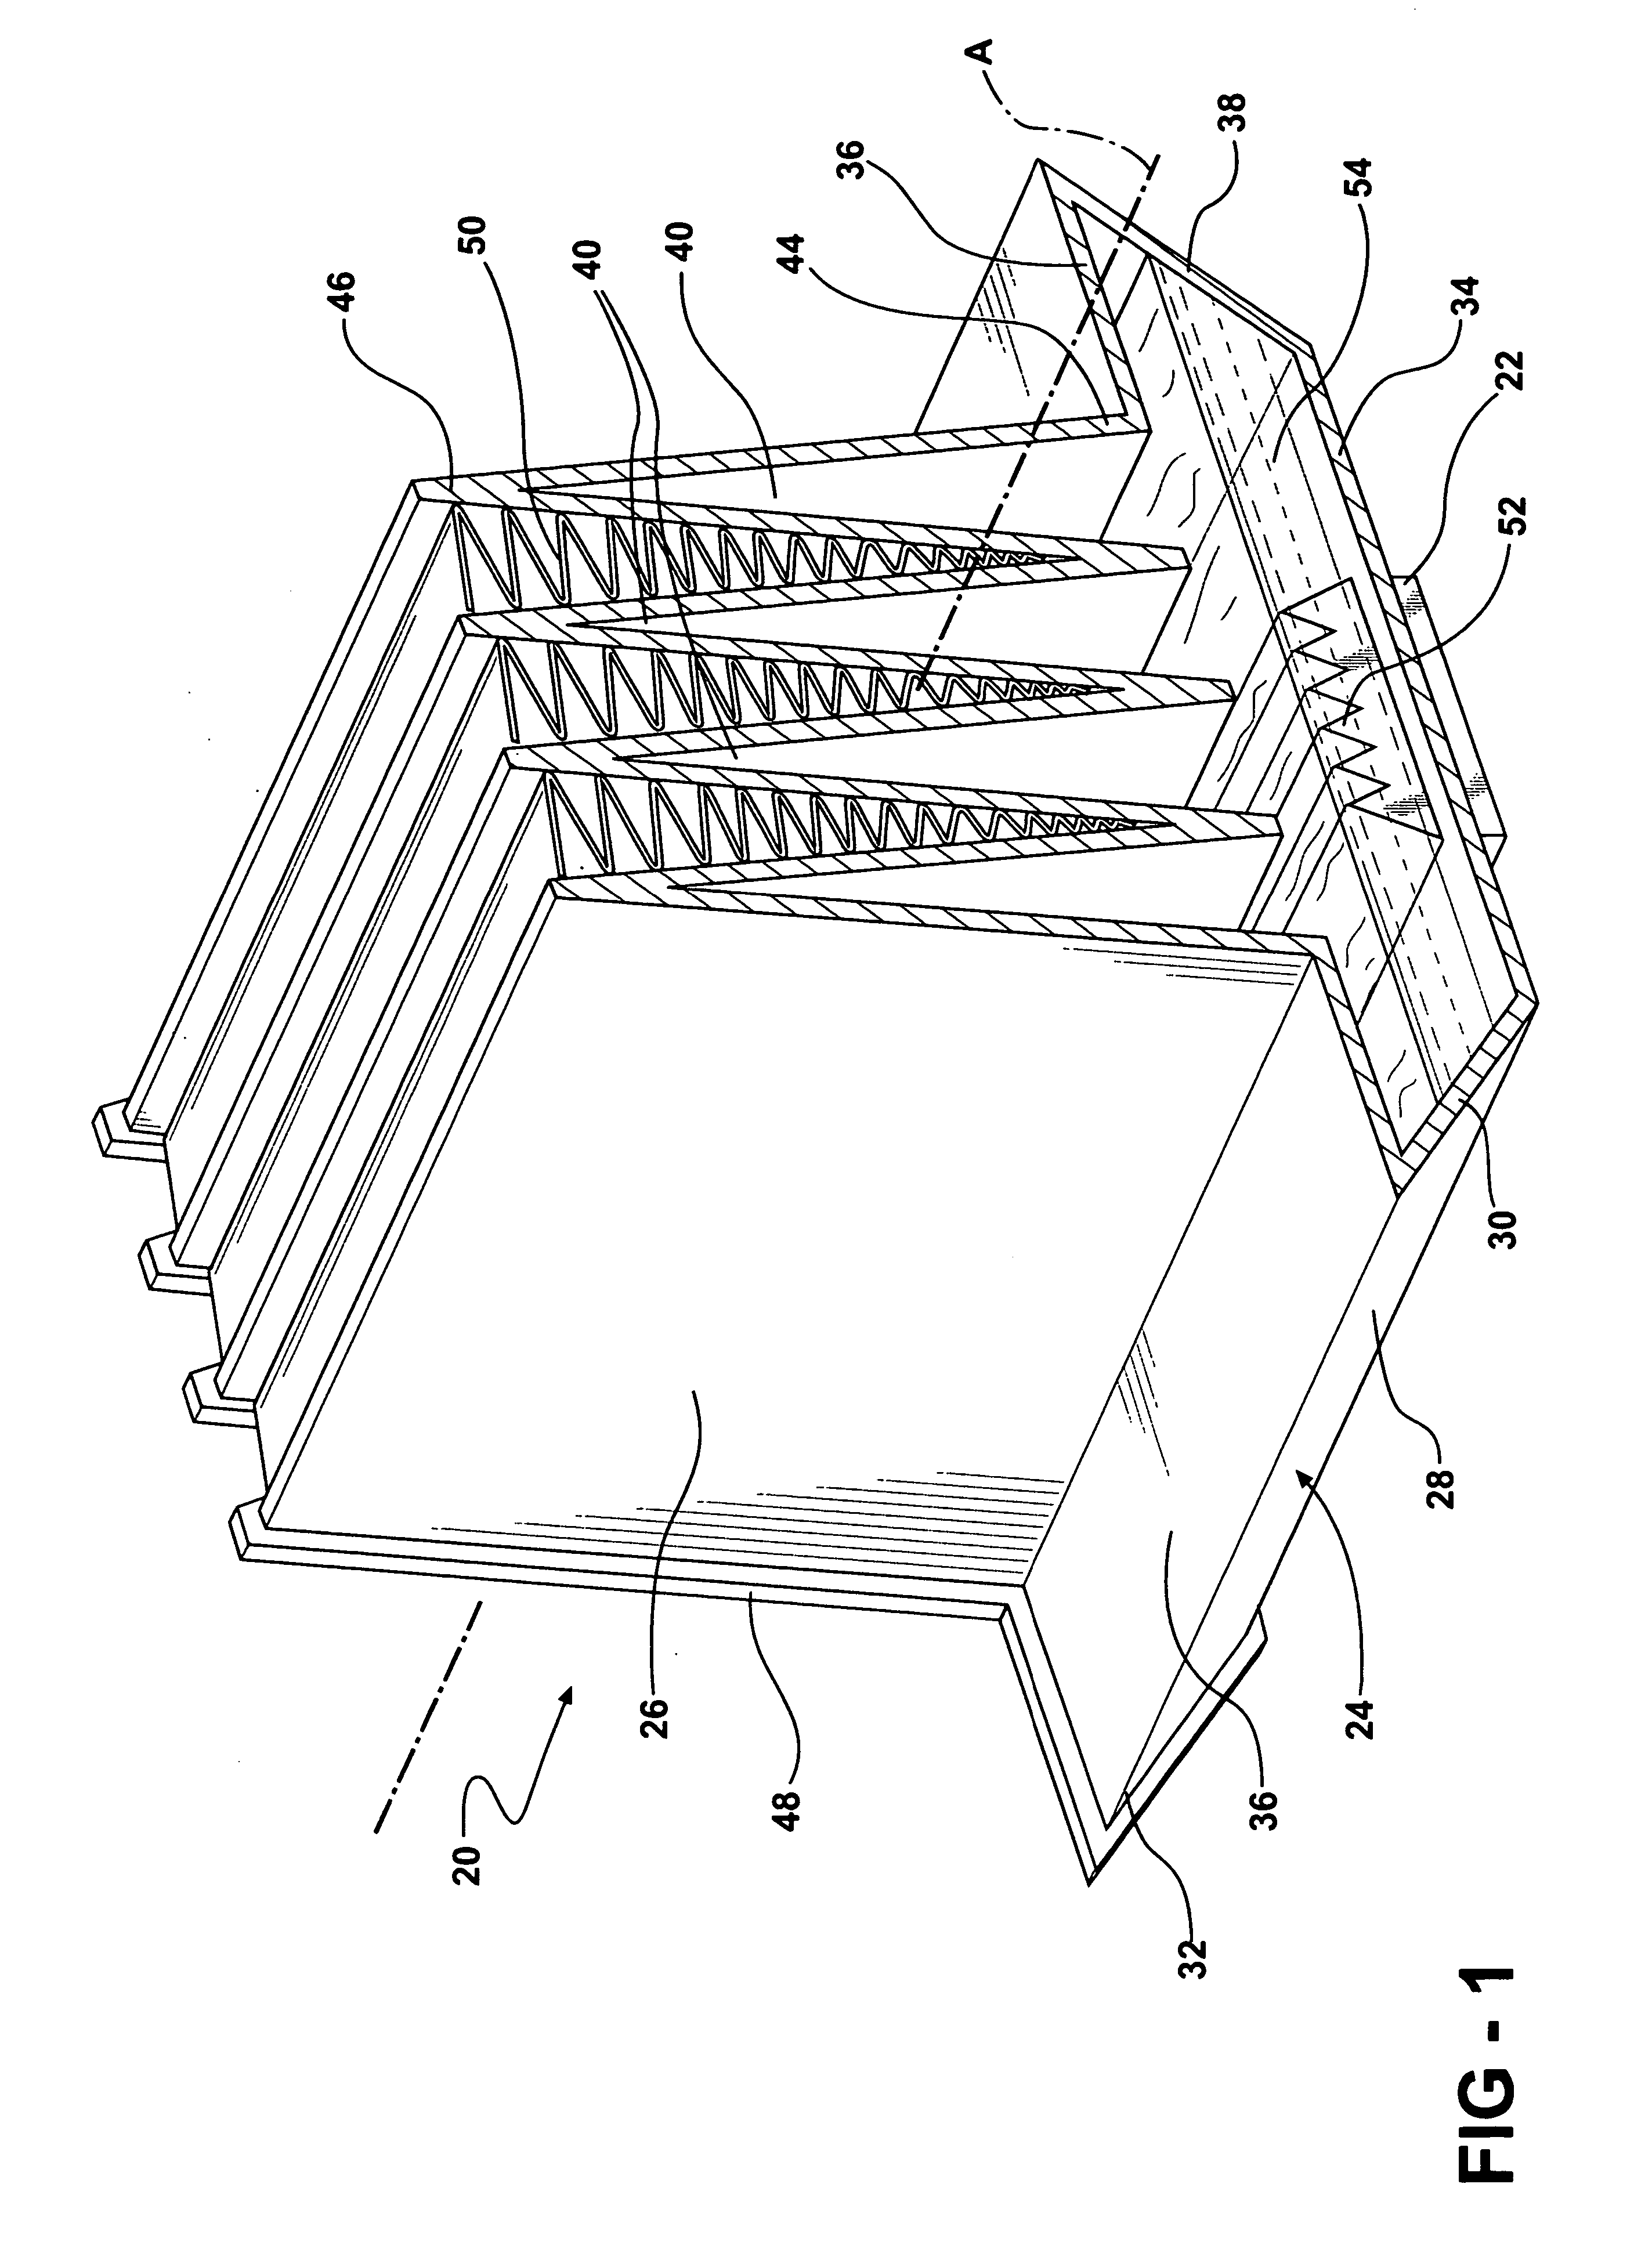 Orientation insensitive thermosiphon of v-configuration